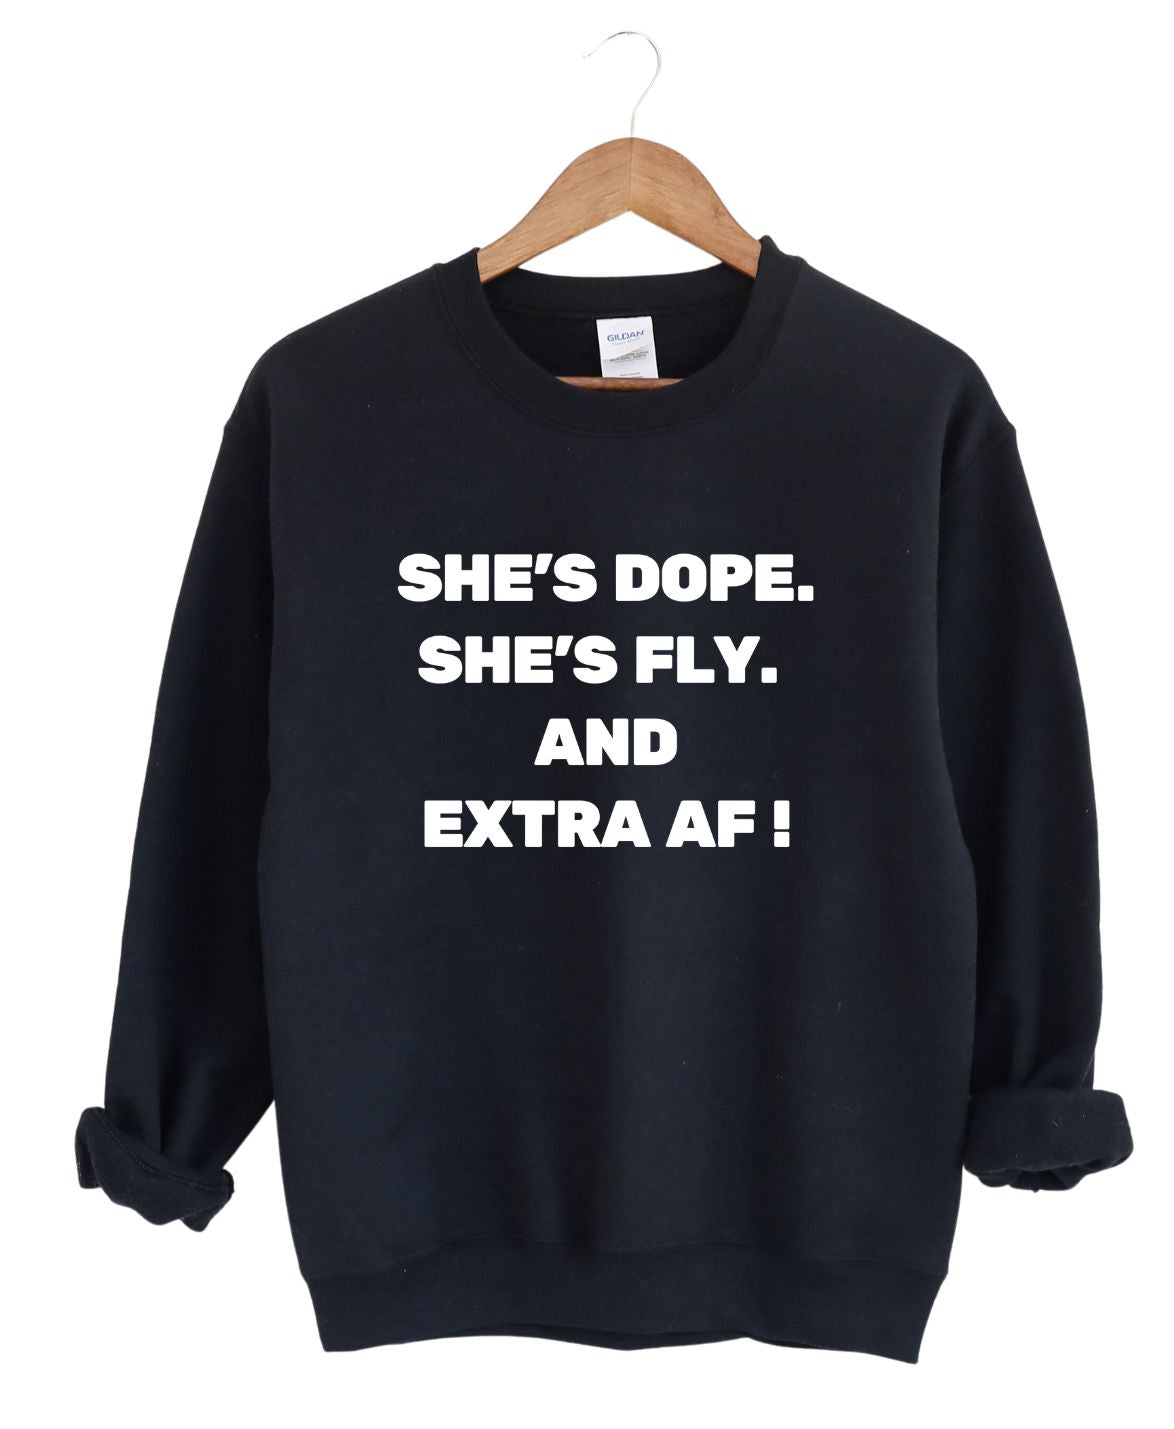 She's Dope' She's Fly And Extra AF  -Sweatshirt